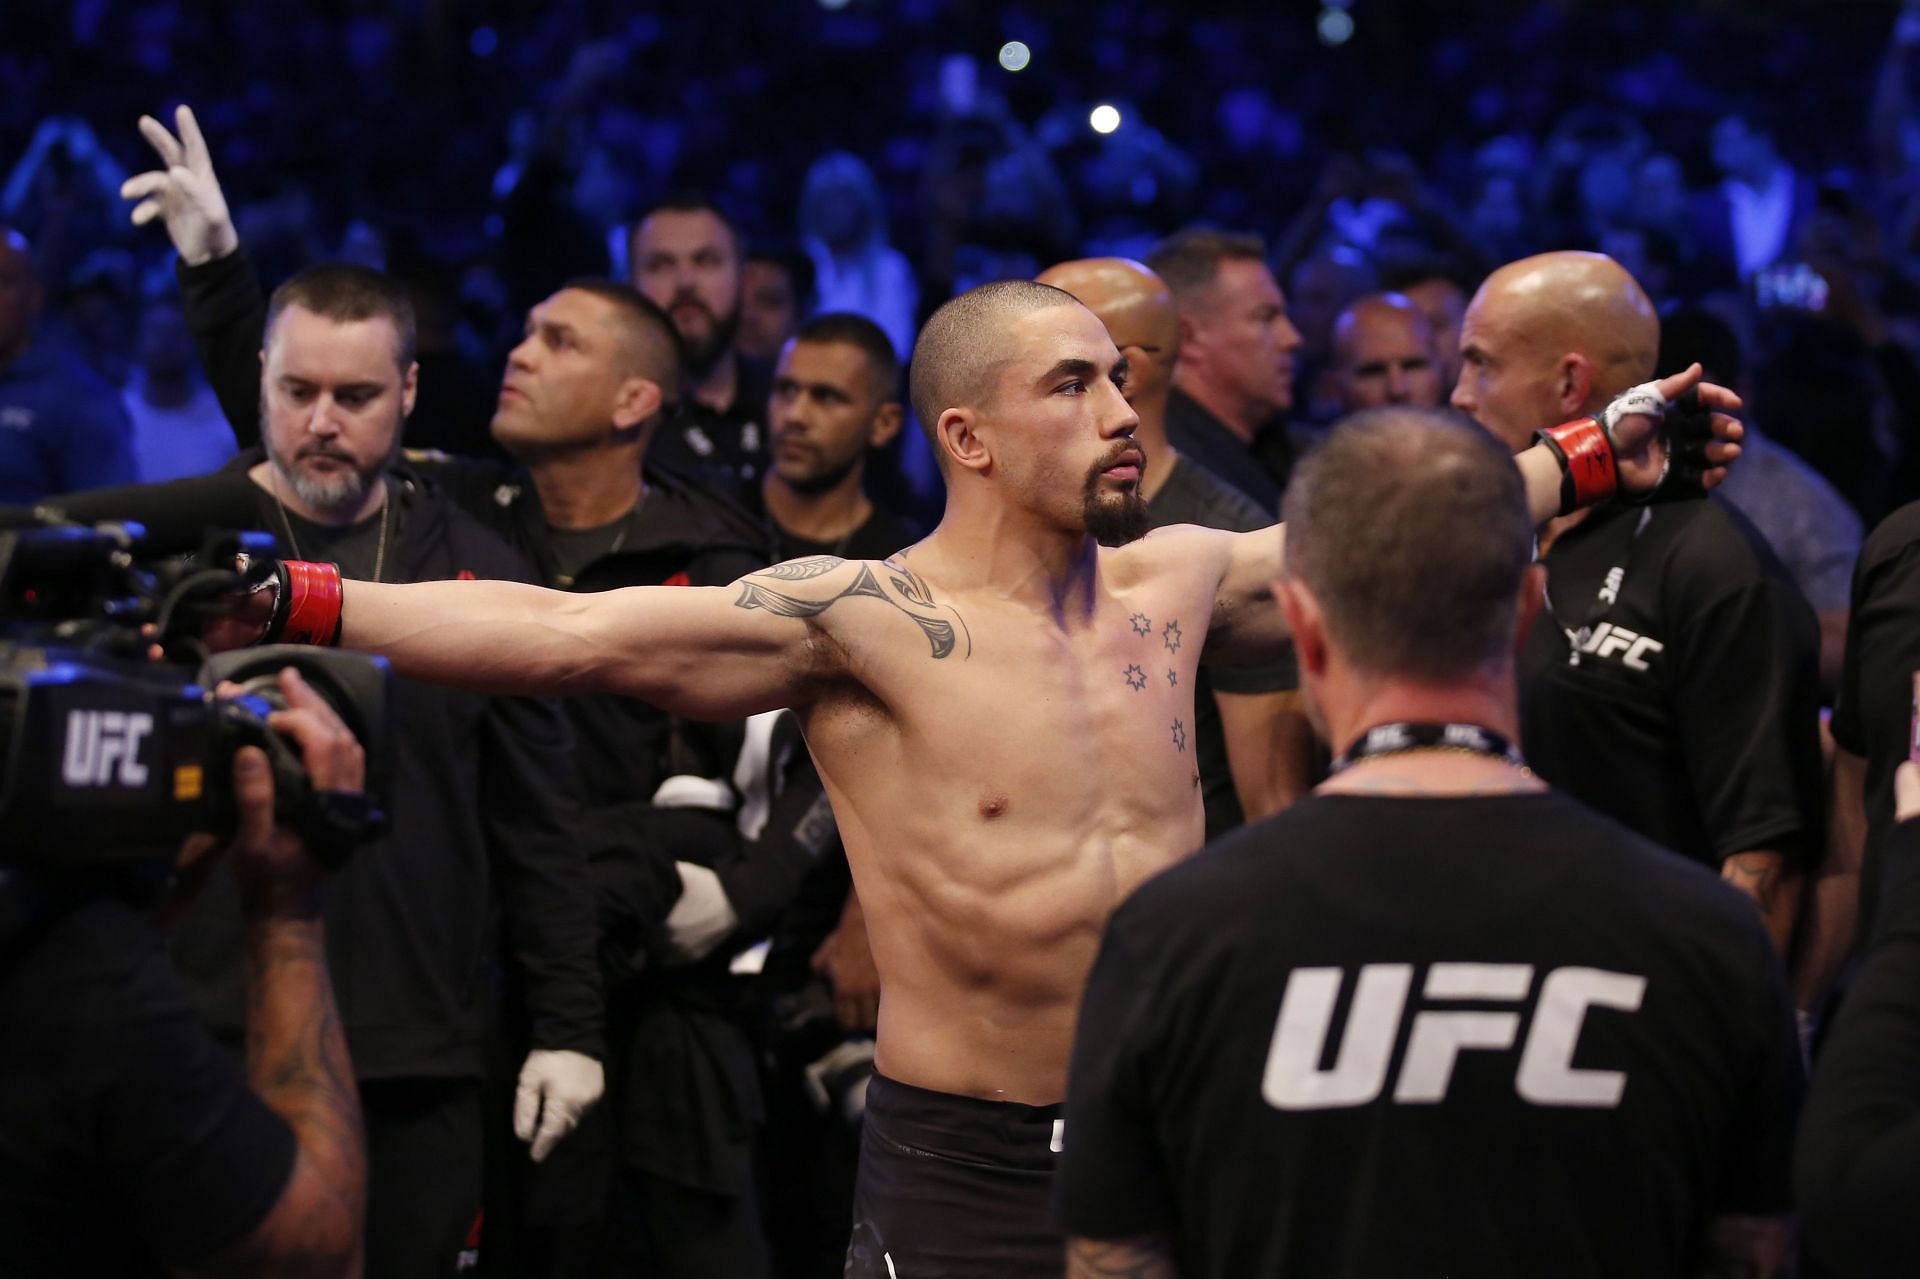 Whittaker lost his middleweight title in 2019